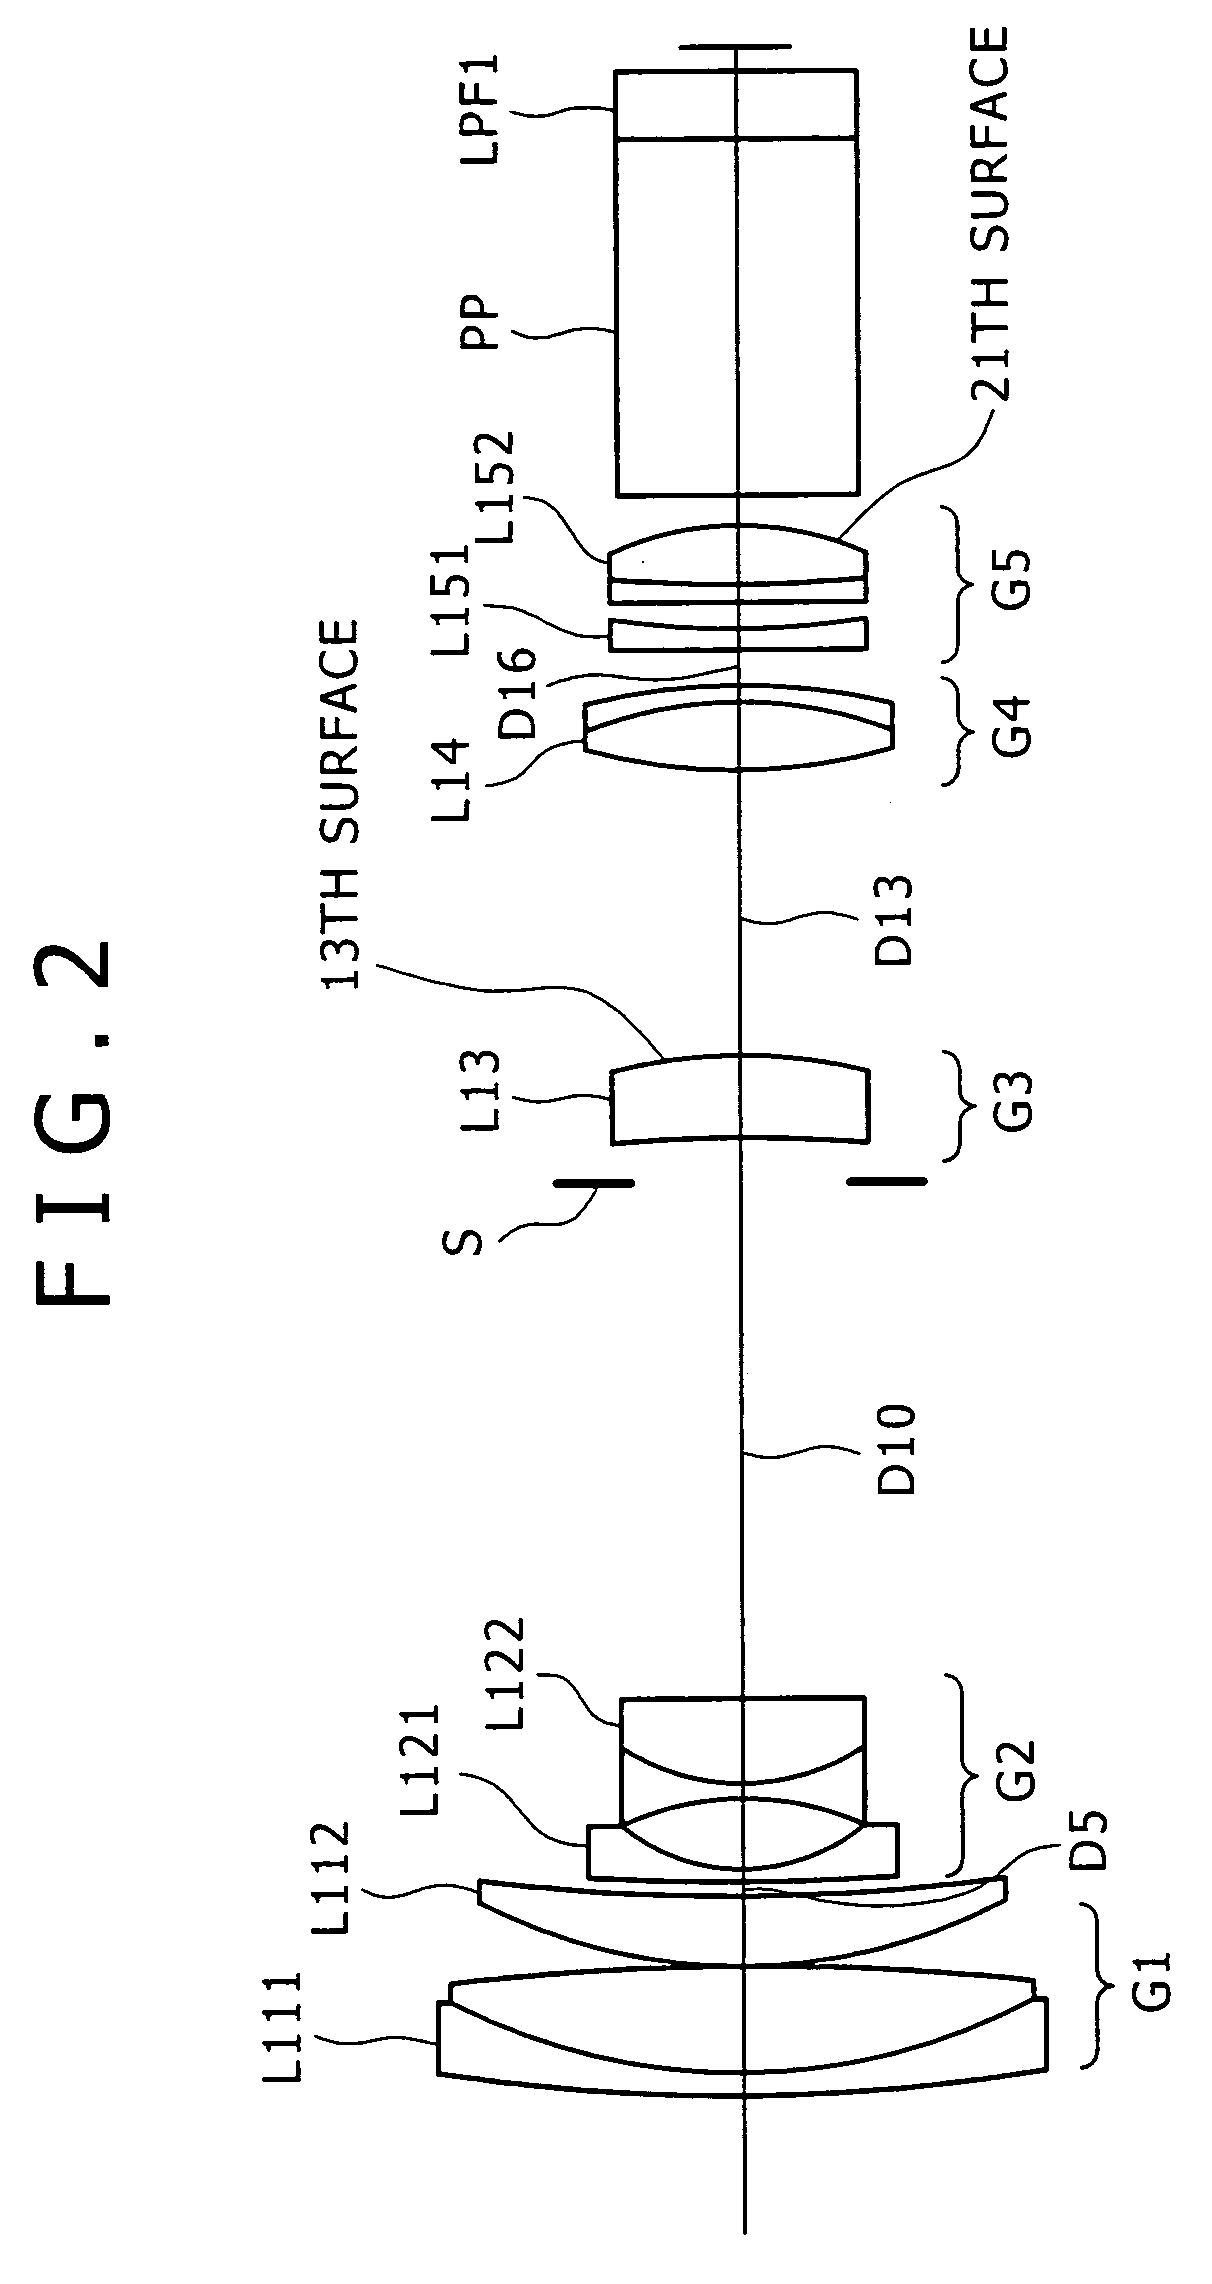 Zoom Lens and Imaging Apparatus